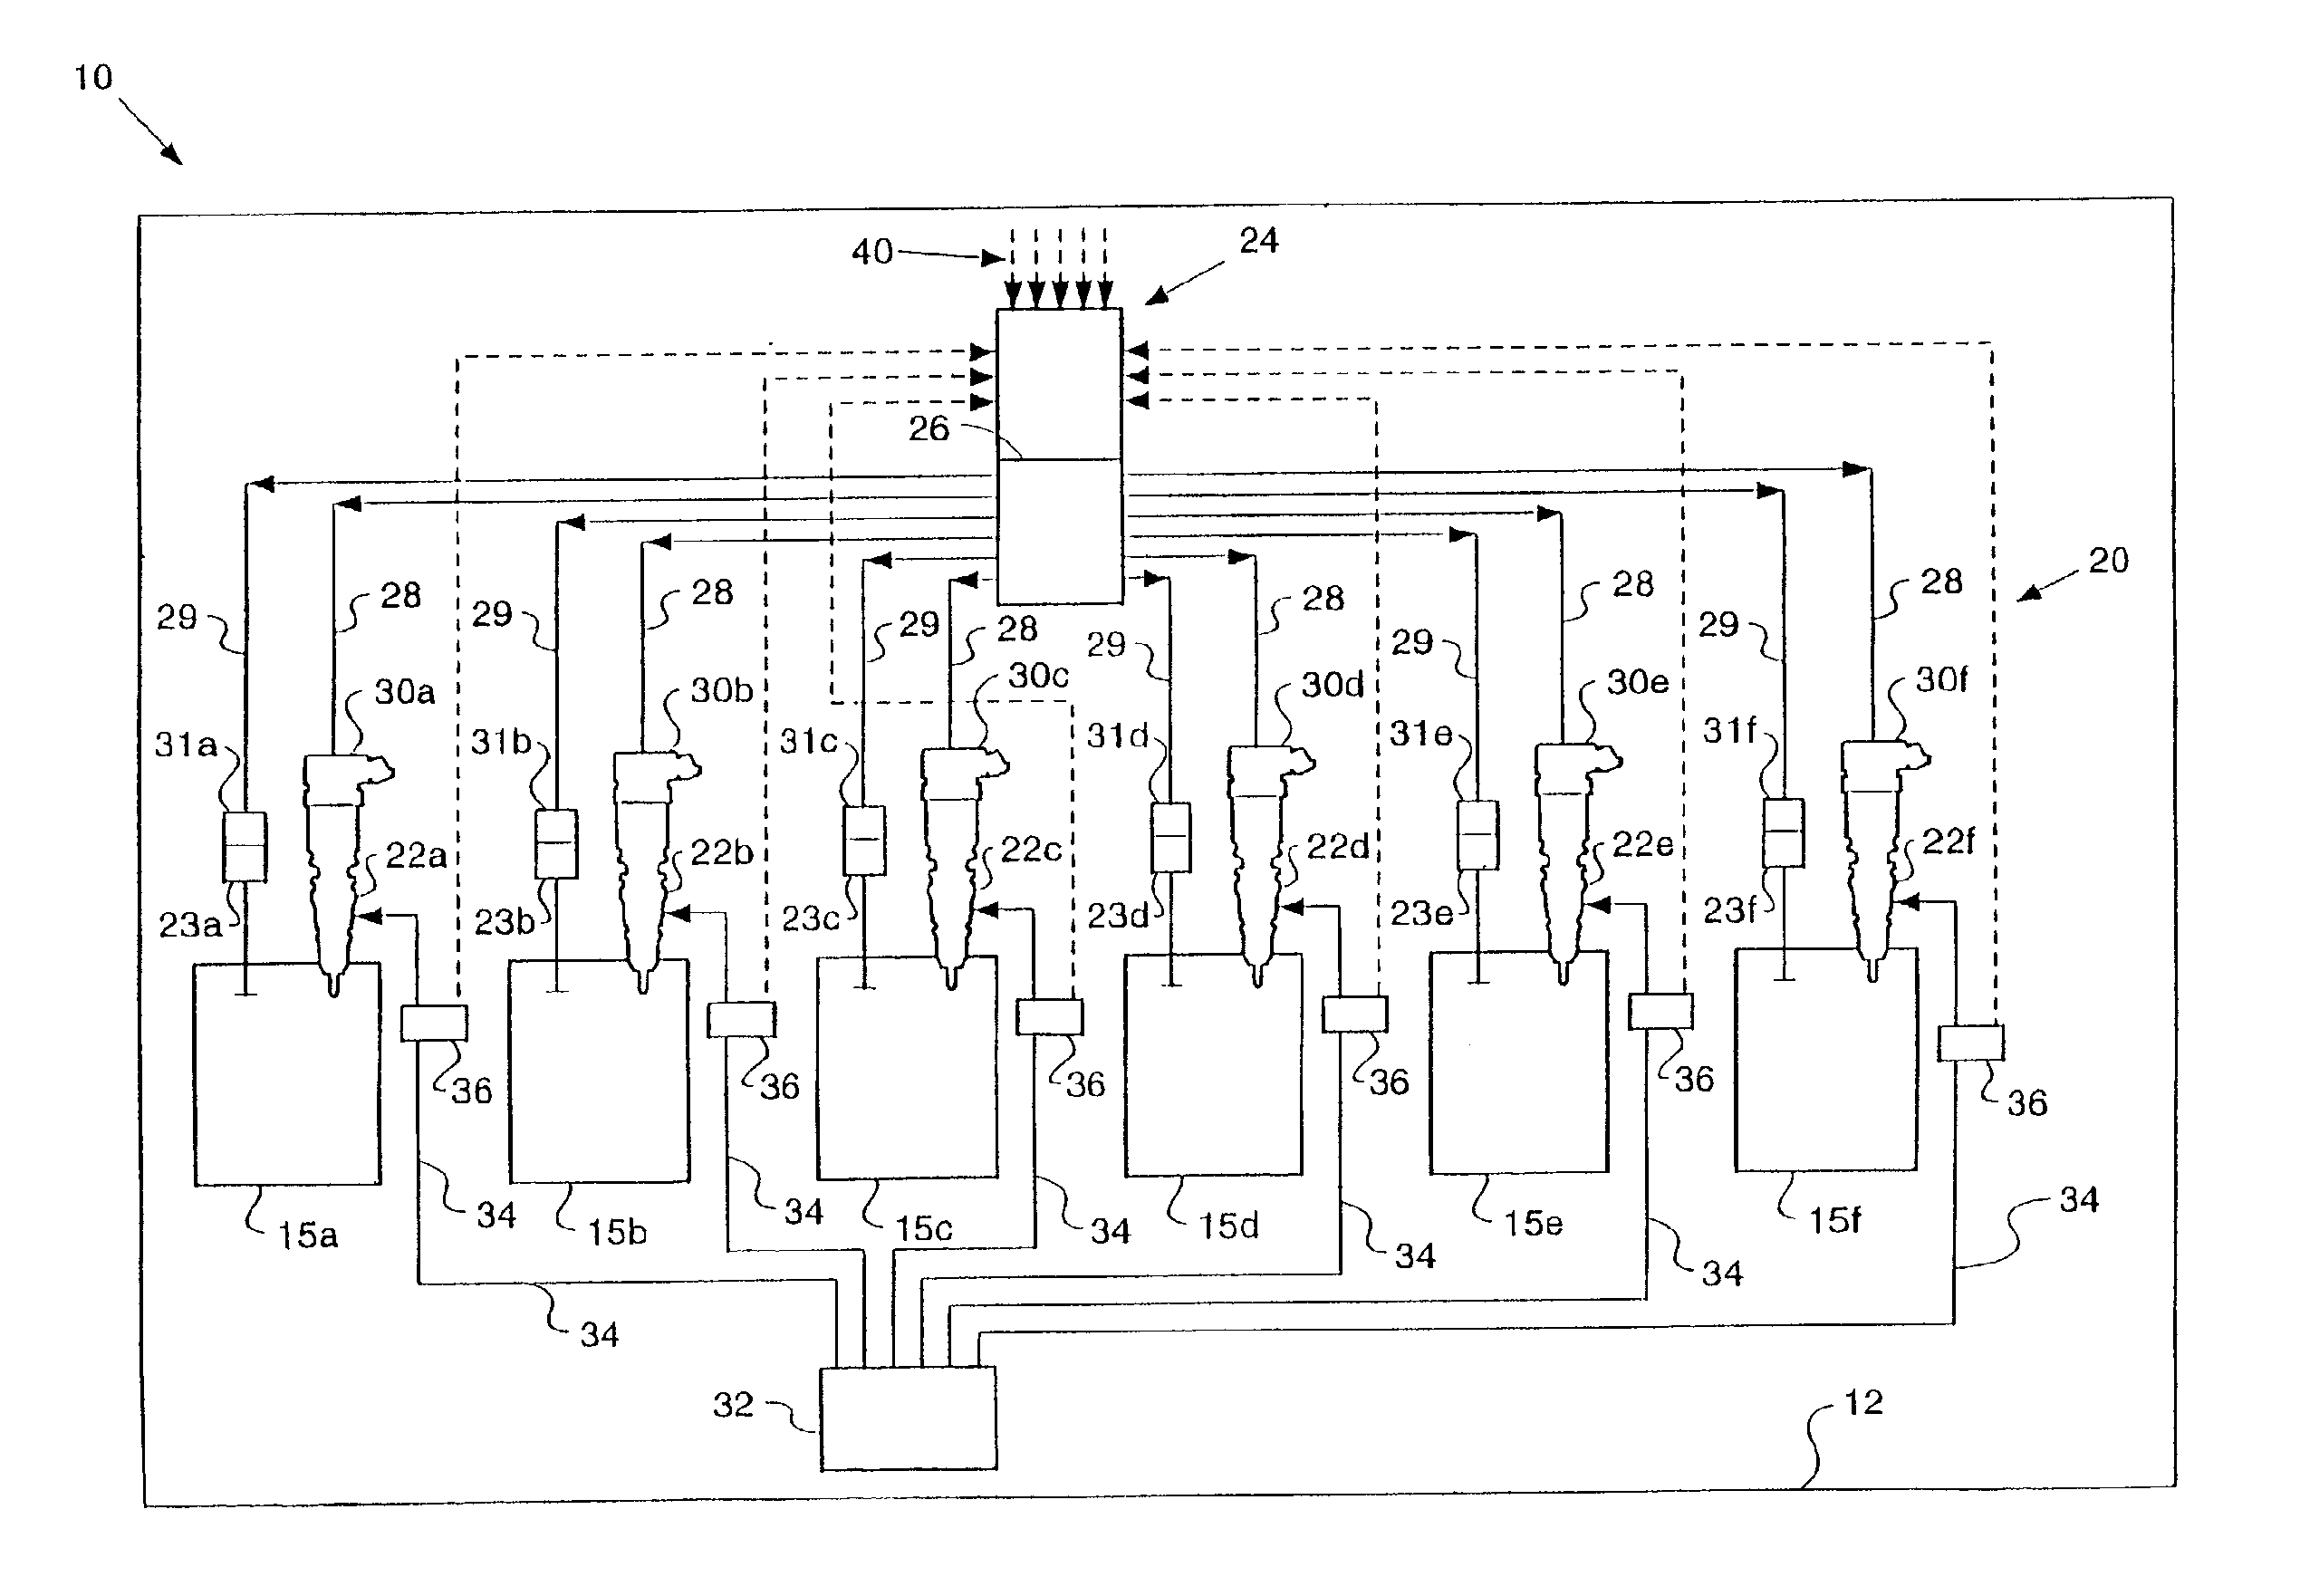 In-chassis engine compression release brake diagnostic test and electronic control module using the same